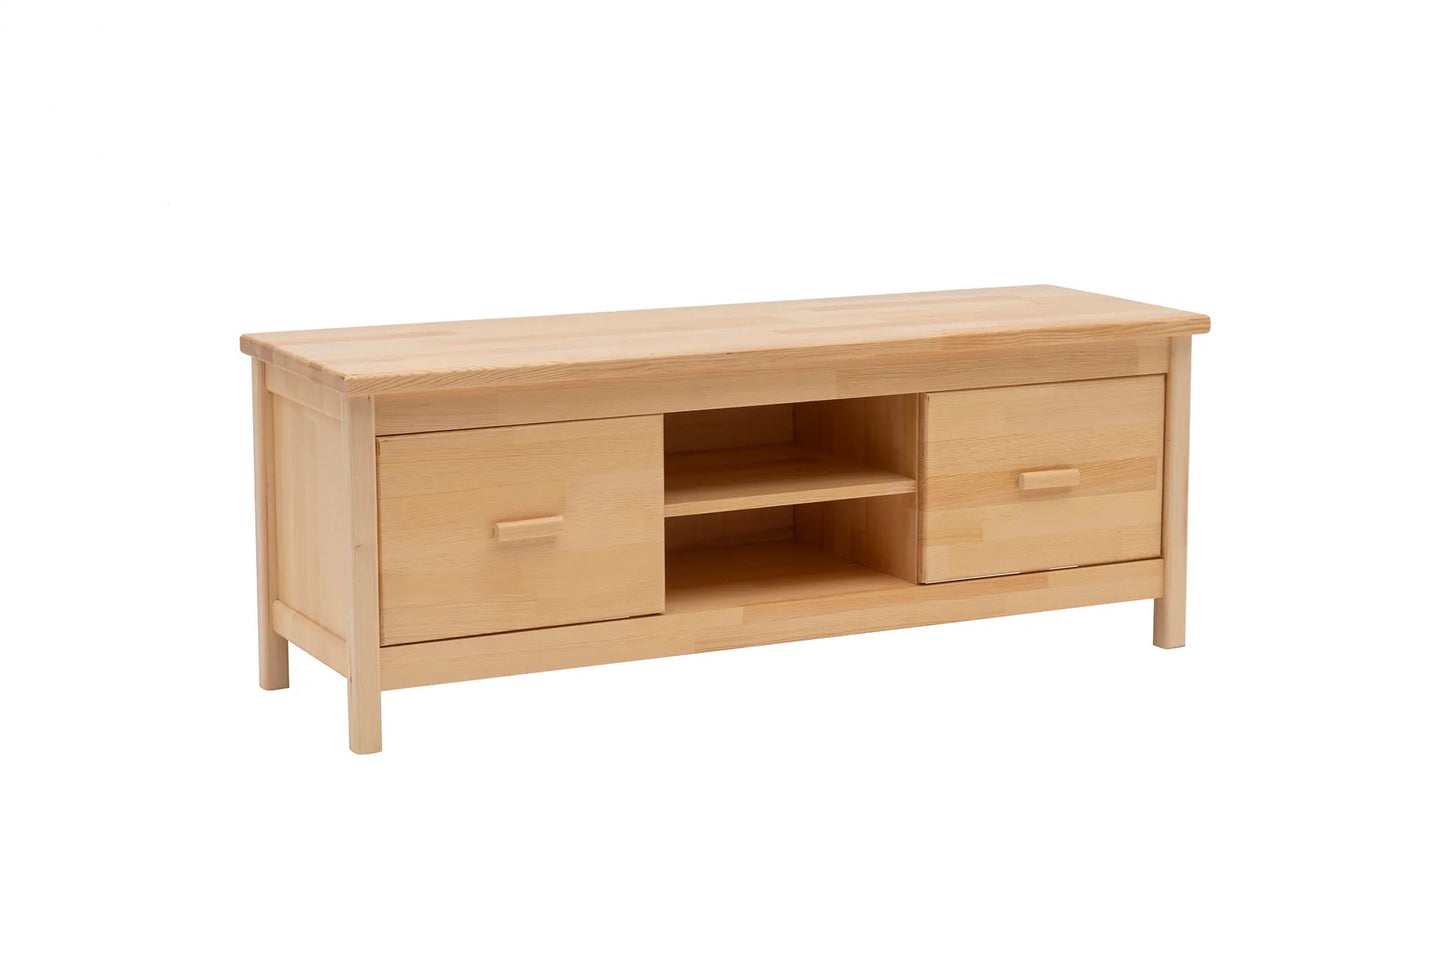 Solid Pine Wood Handmade TV Stand with Storage Drawers and Shelves for TVs up to 60" Dawn